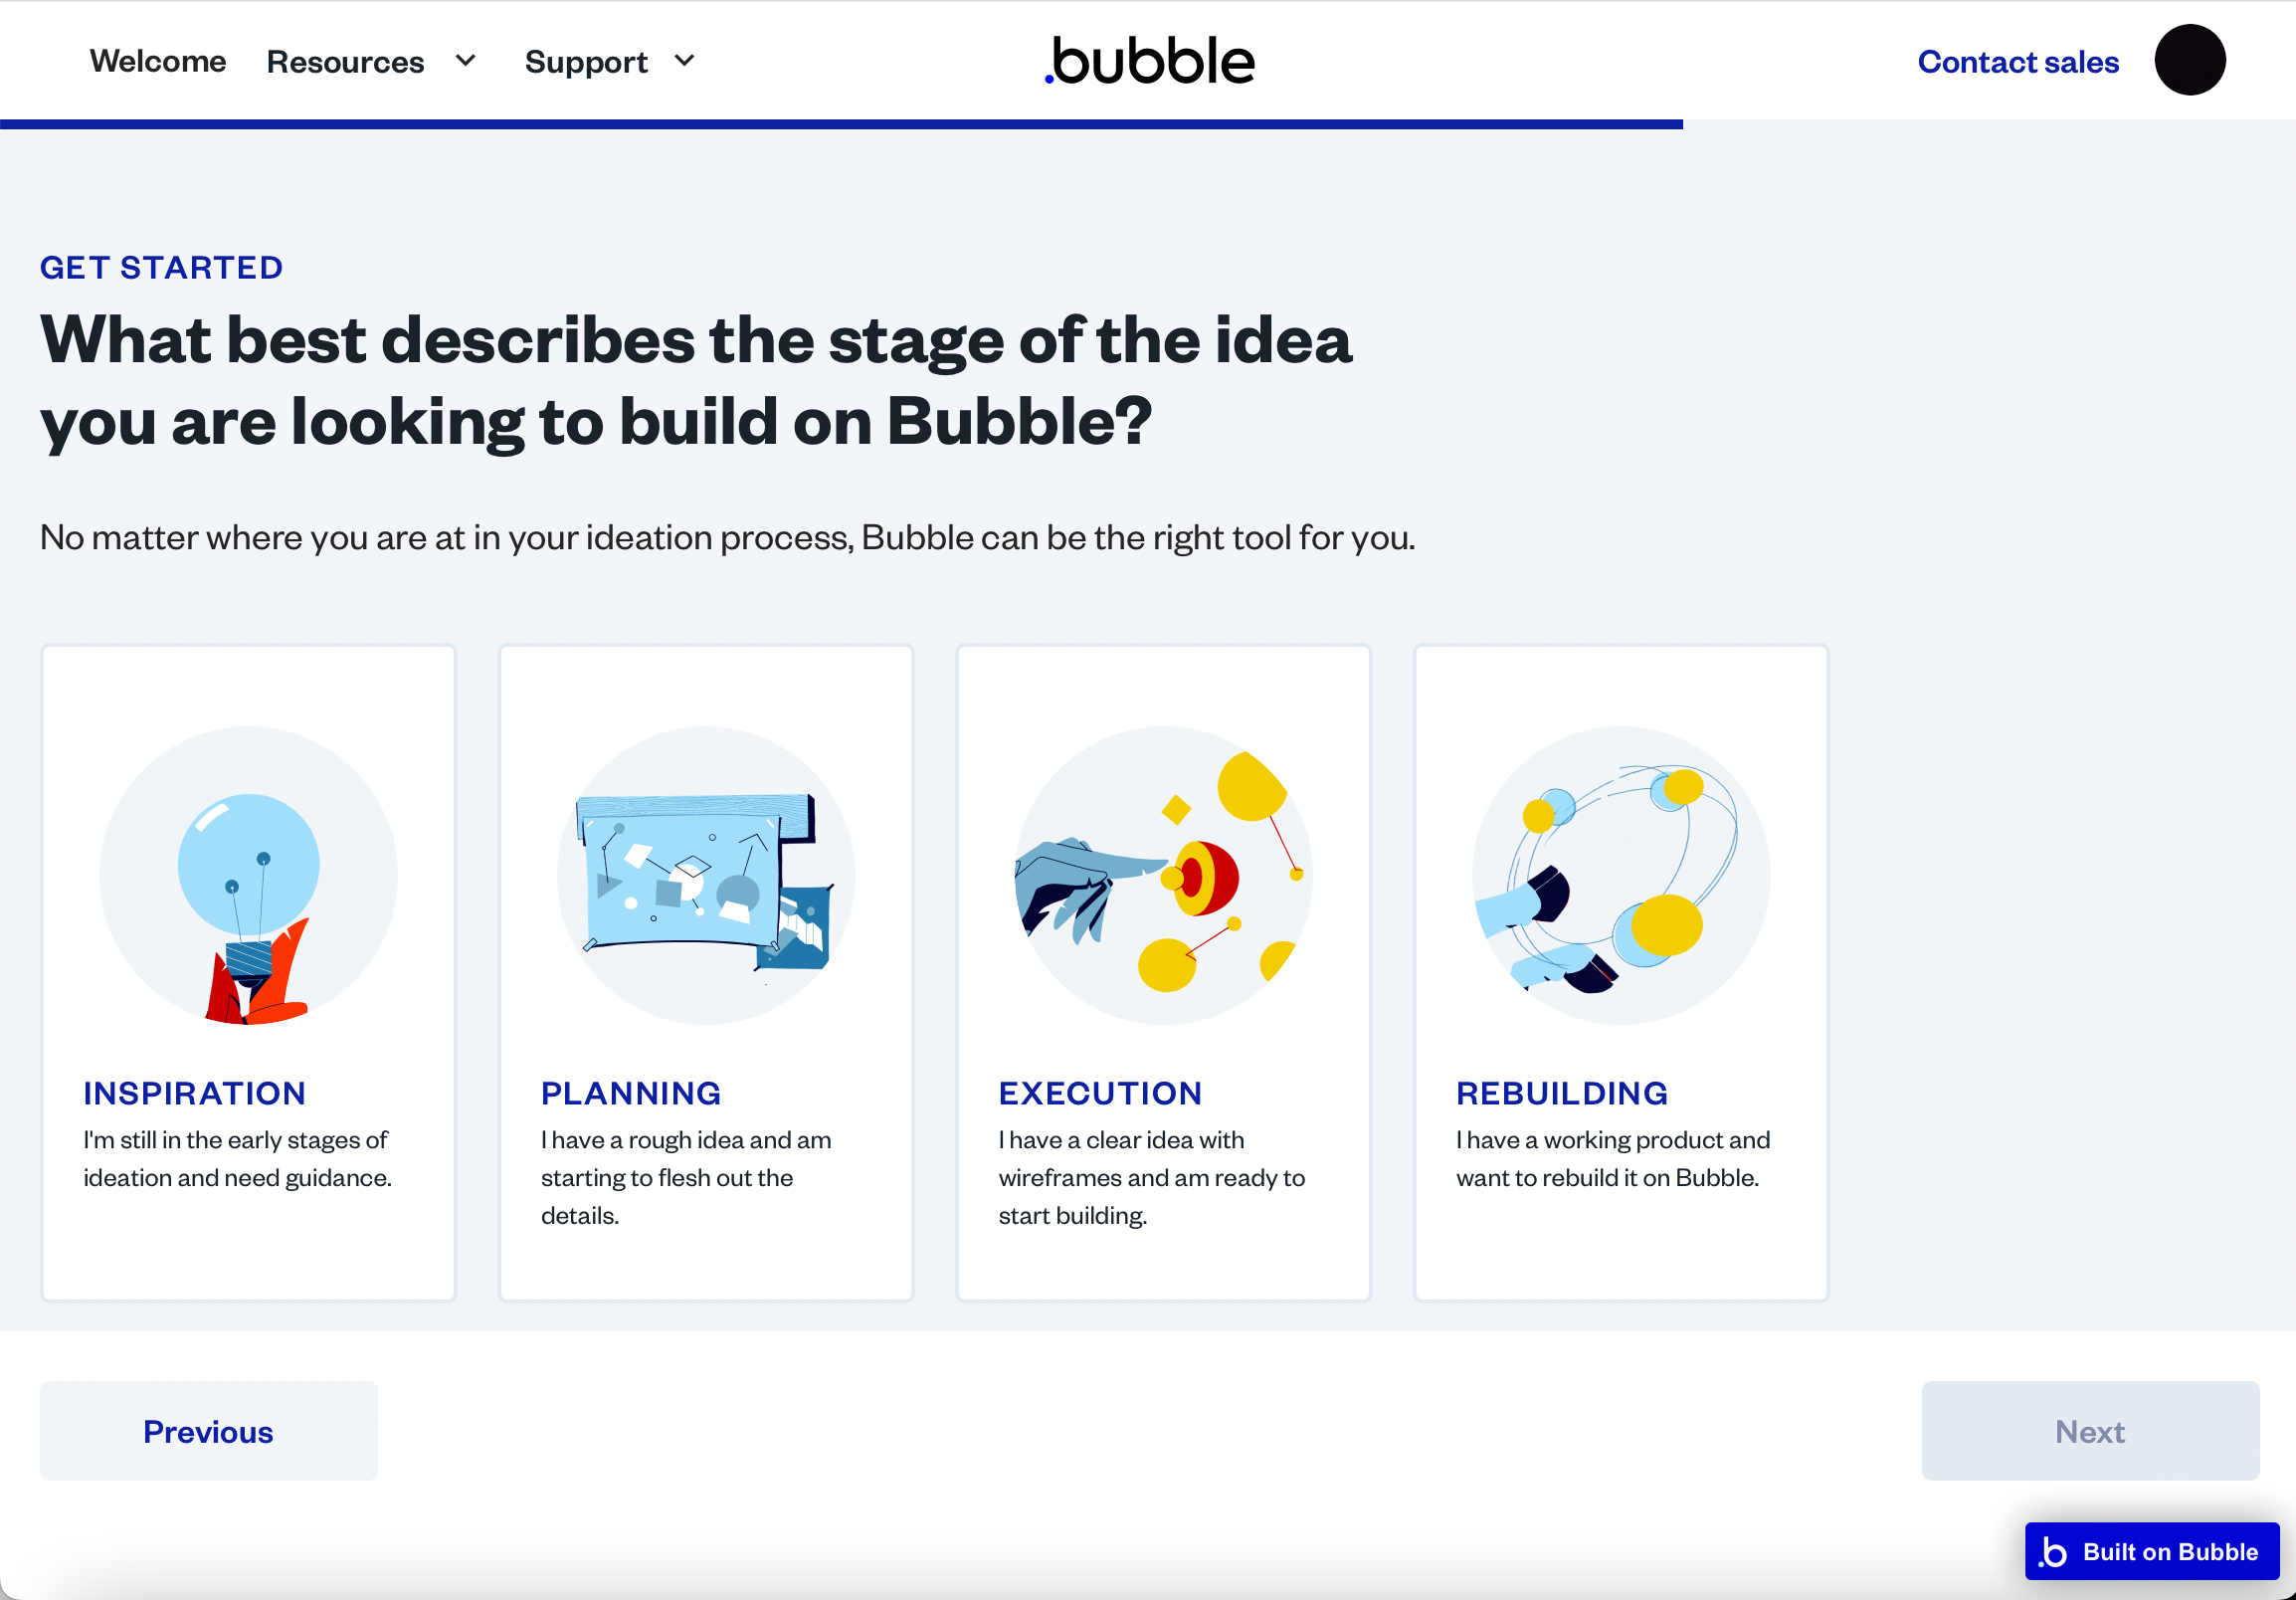 How to Run a Loop in Bubble.io 